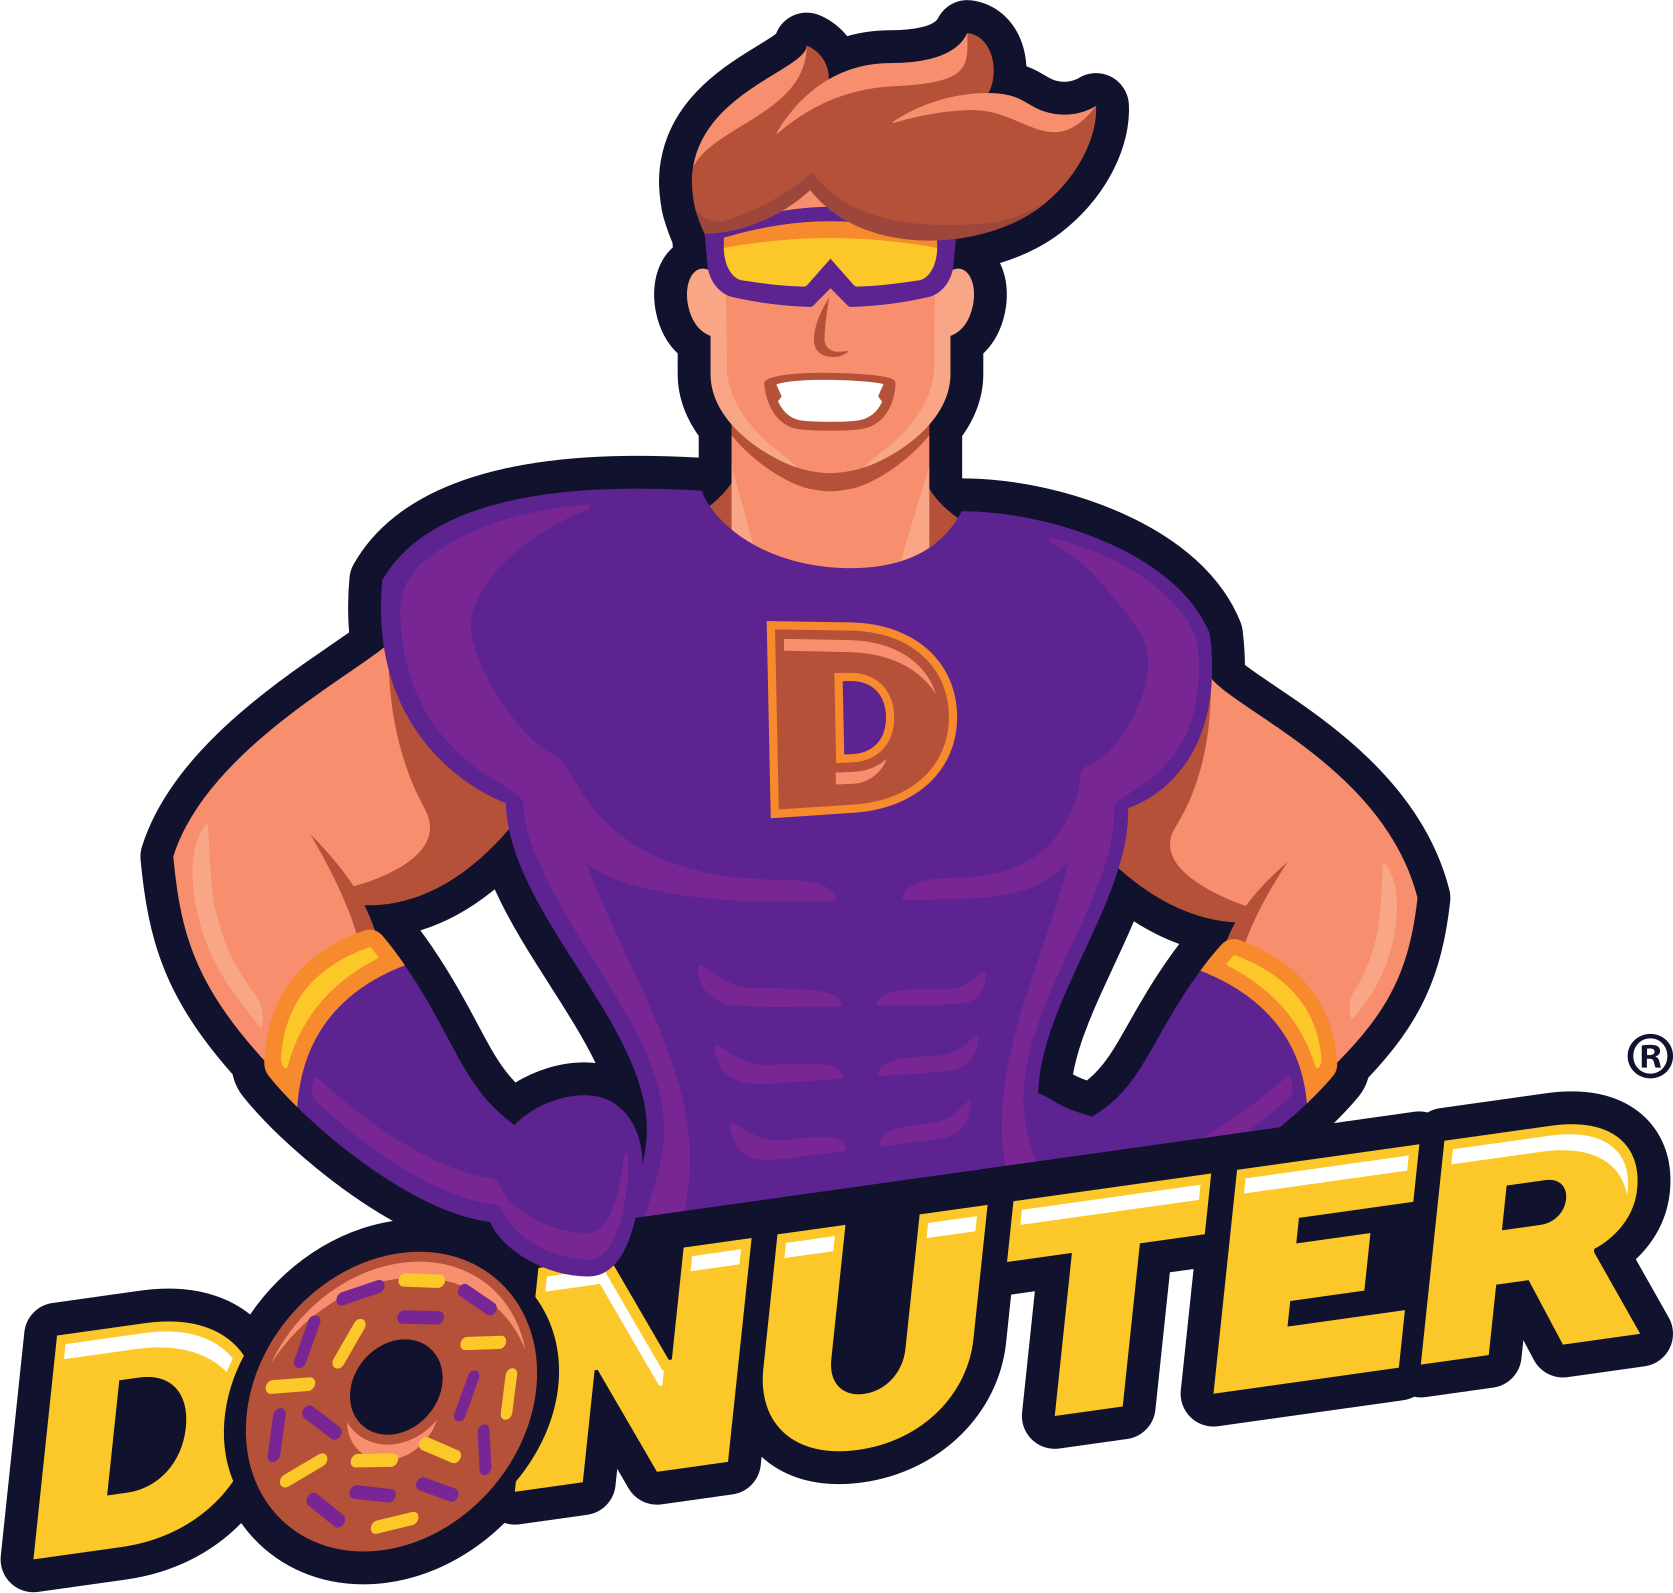 Donuter